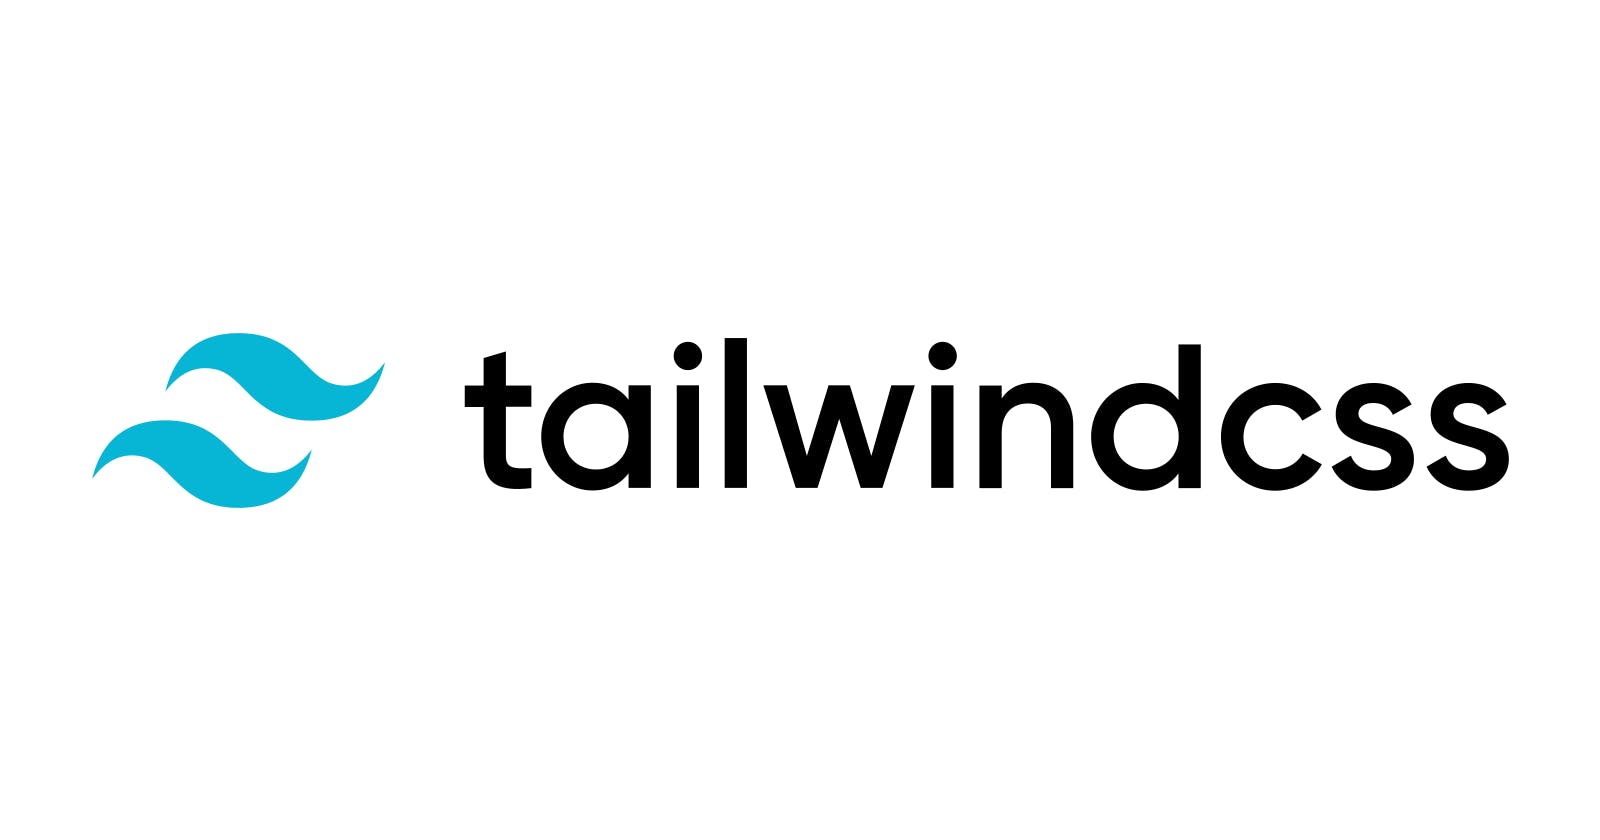 Why I Switched to Tailwind CSS